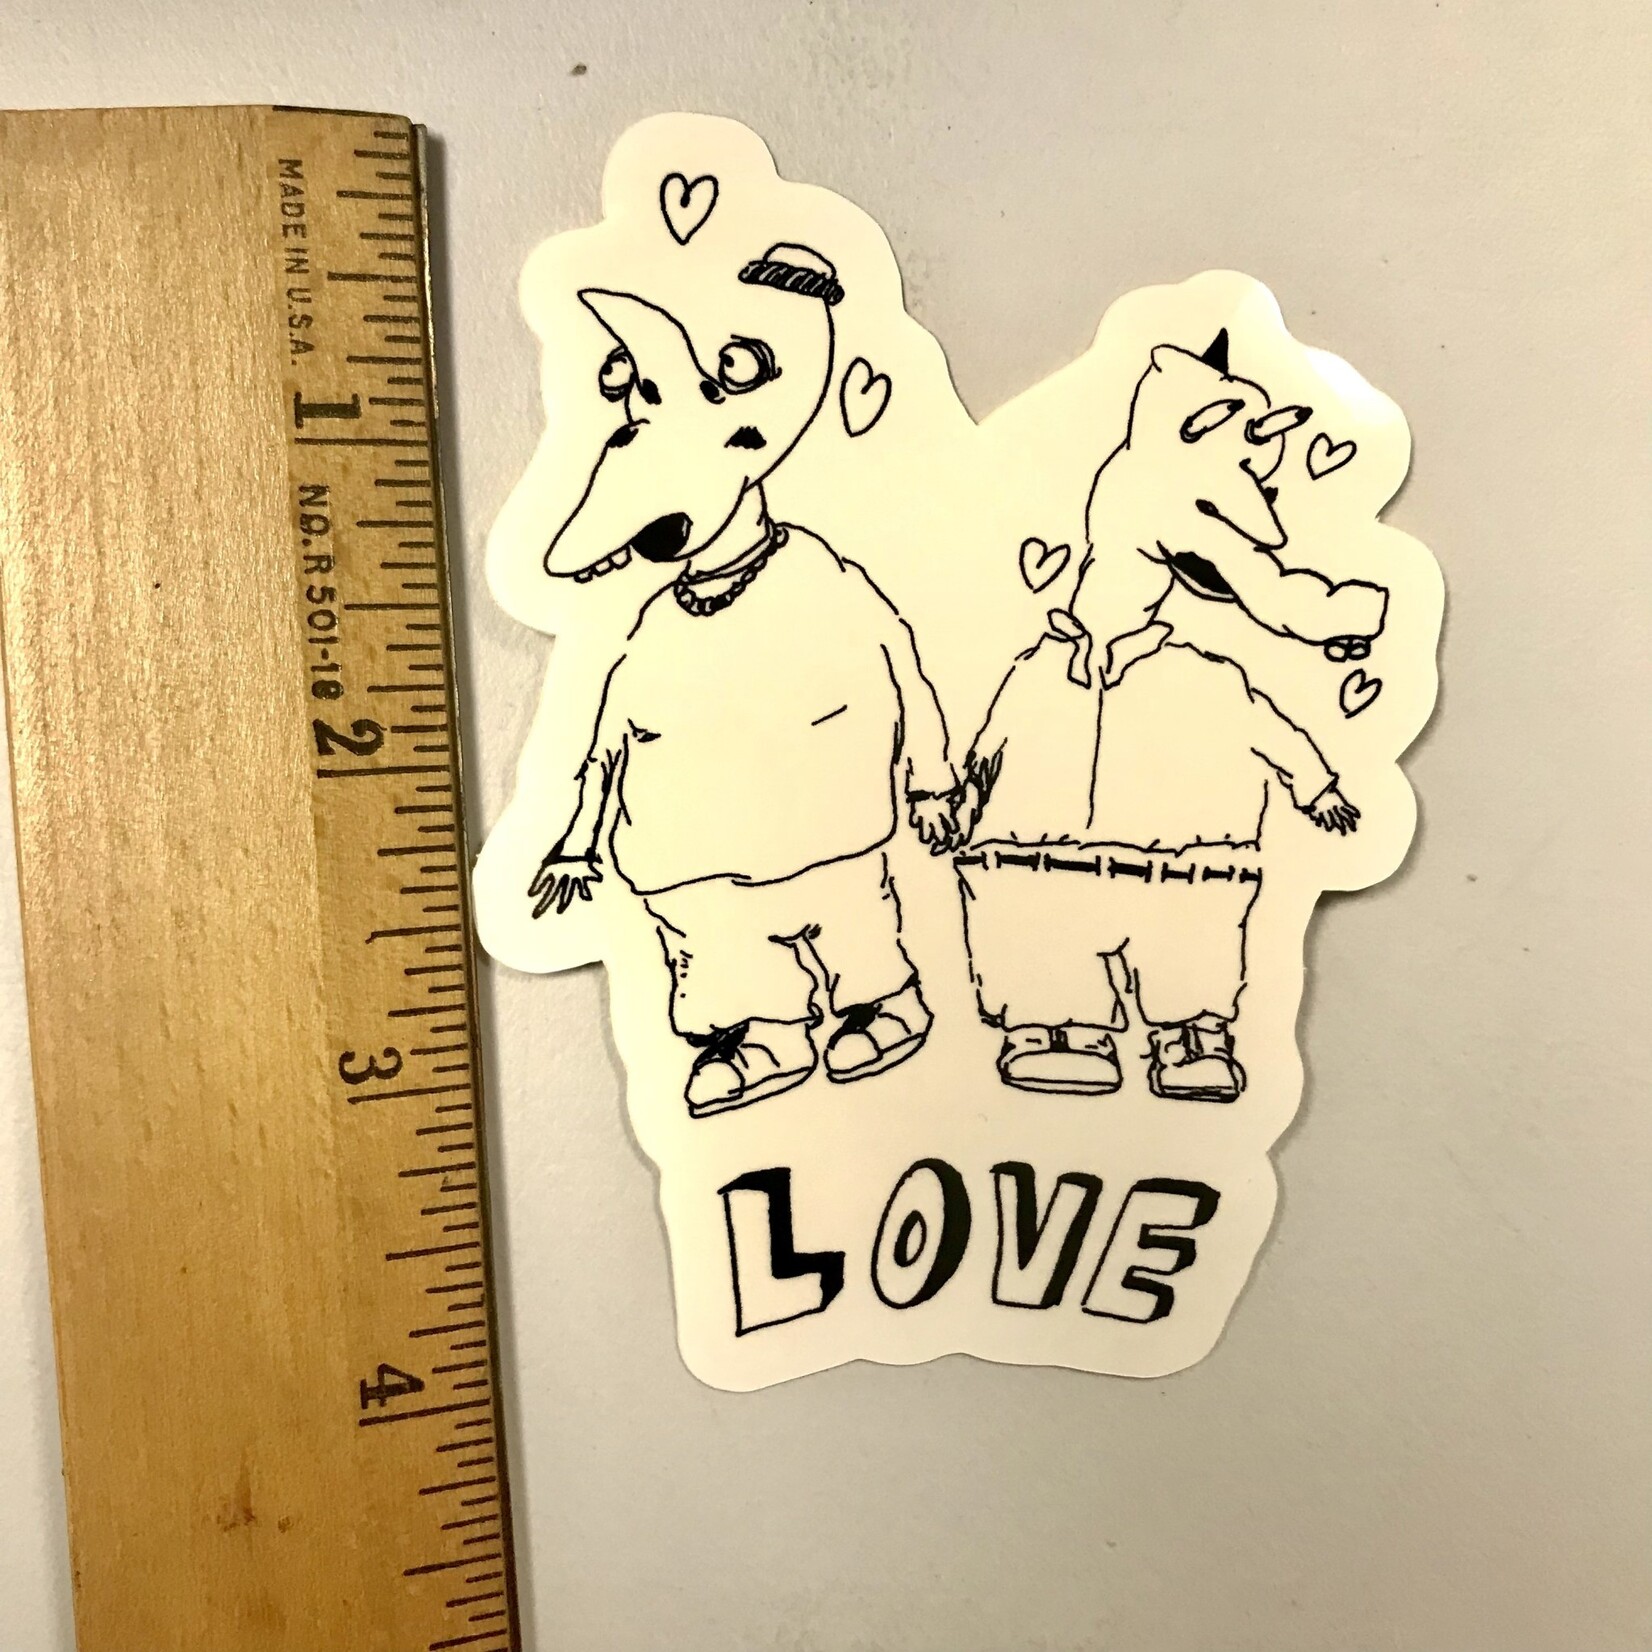 Pictures By Phoenix - Love - Sticker (NEW)